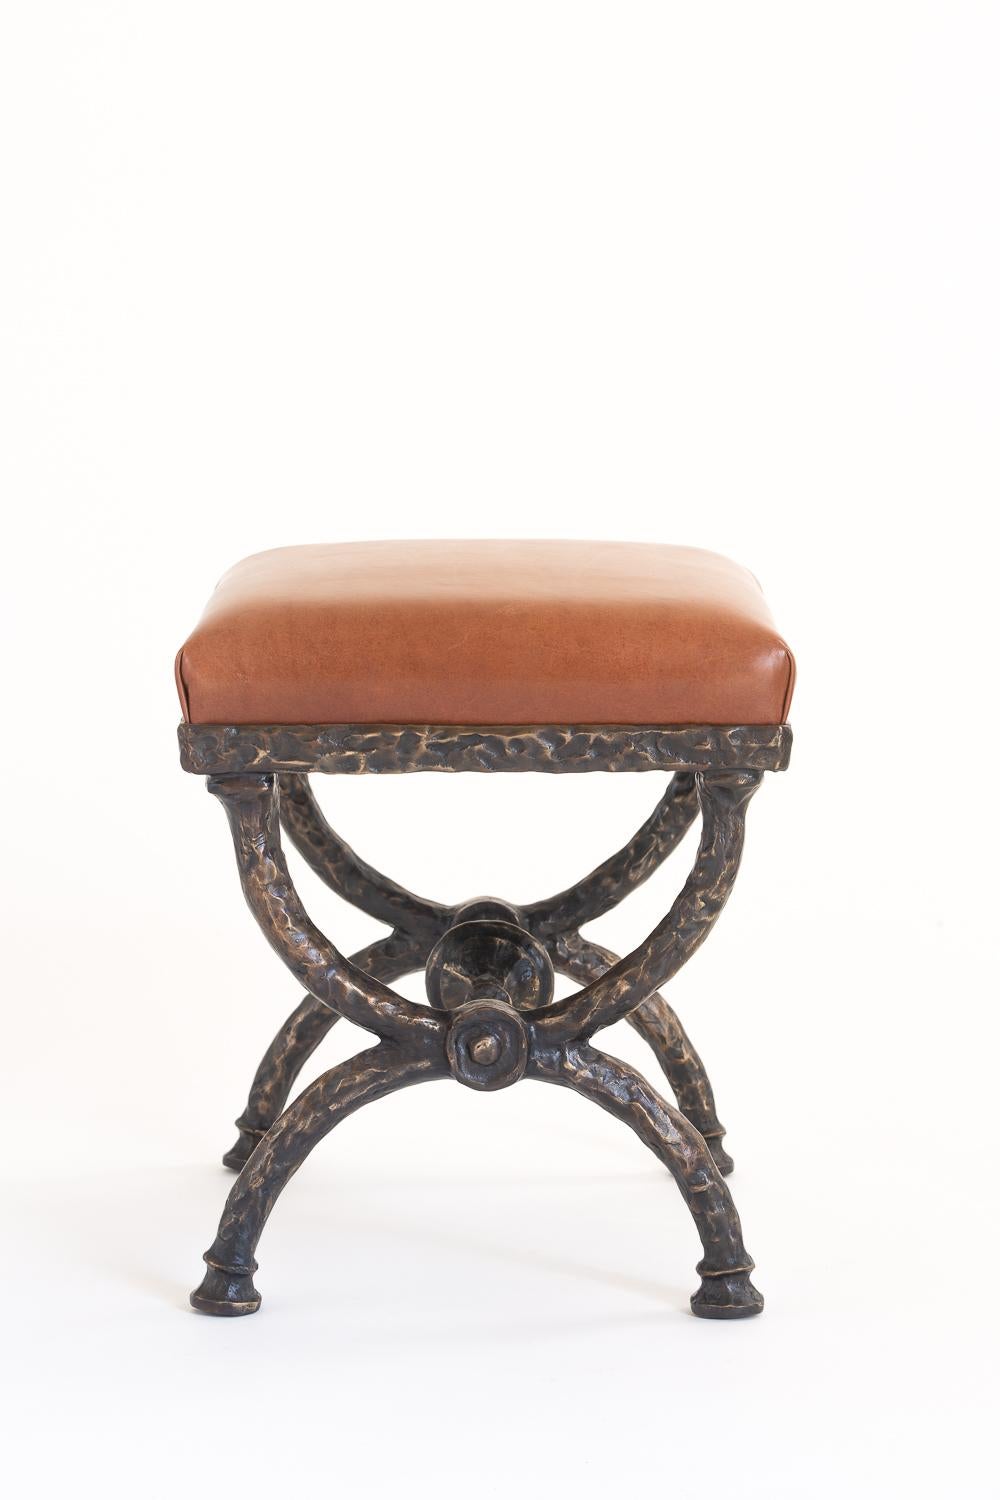 This hand-sculpted bronze stool is hand-forged and presented with a brown or black leather seat. Each piece is numbered and stamped. Custom sizes and finishes available.